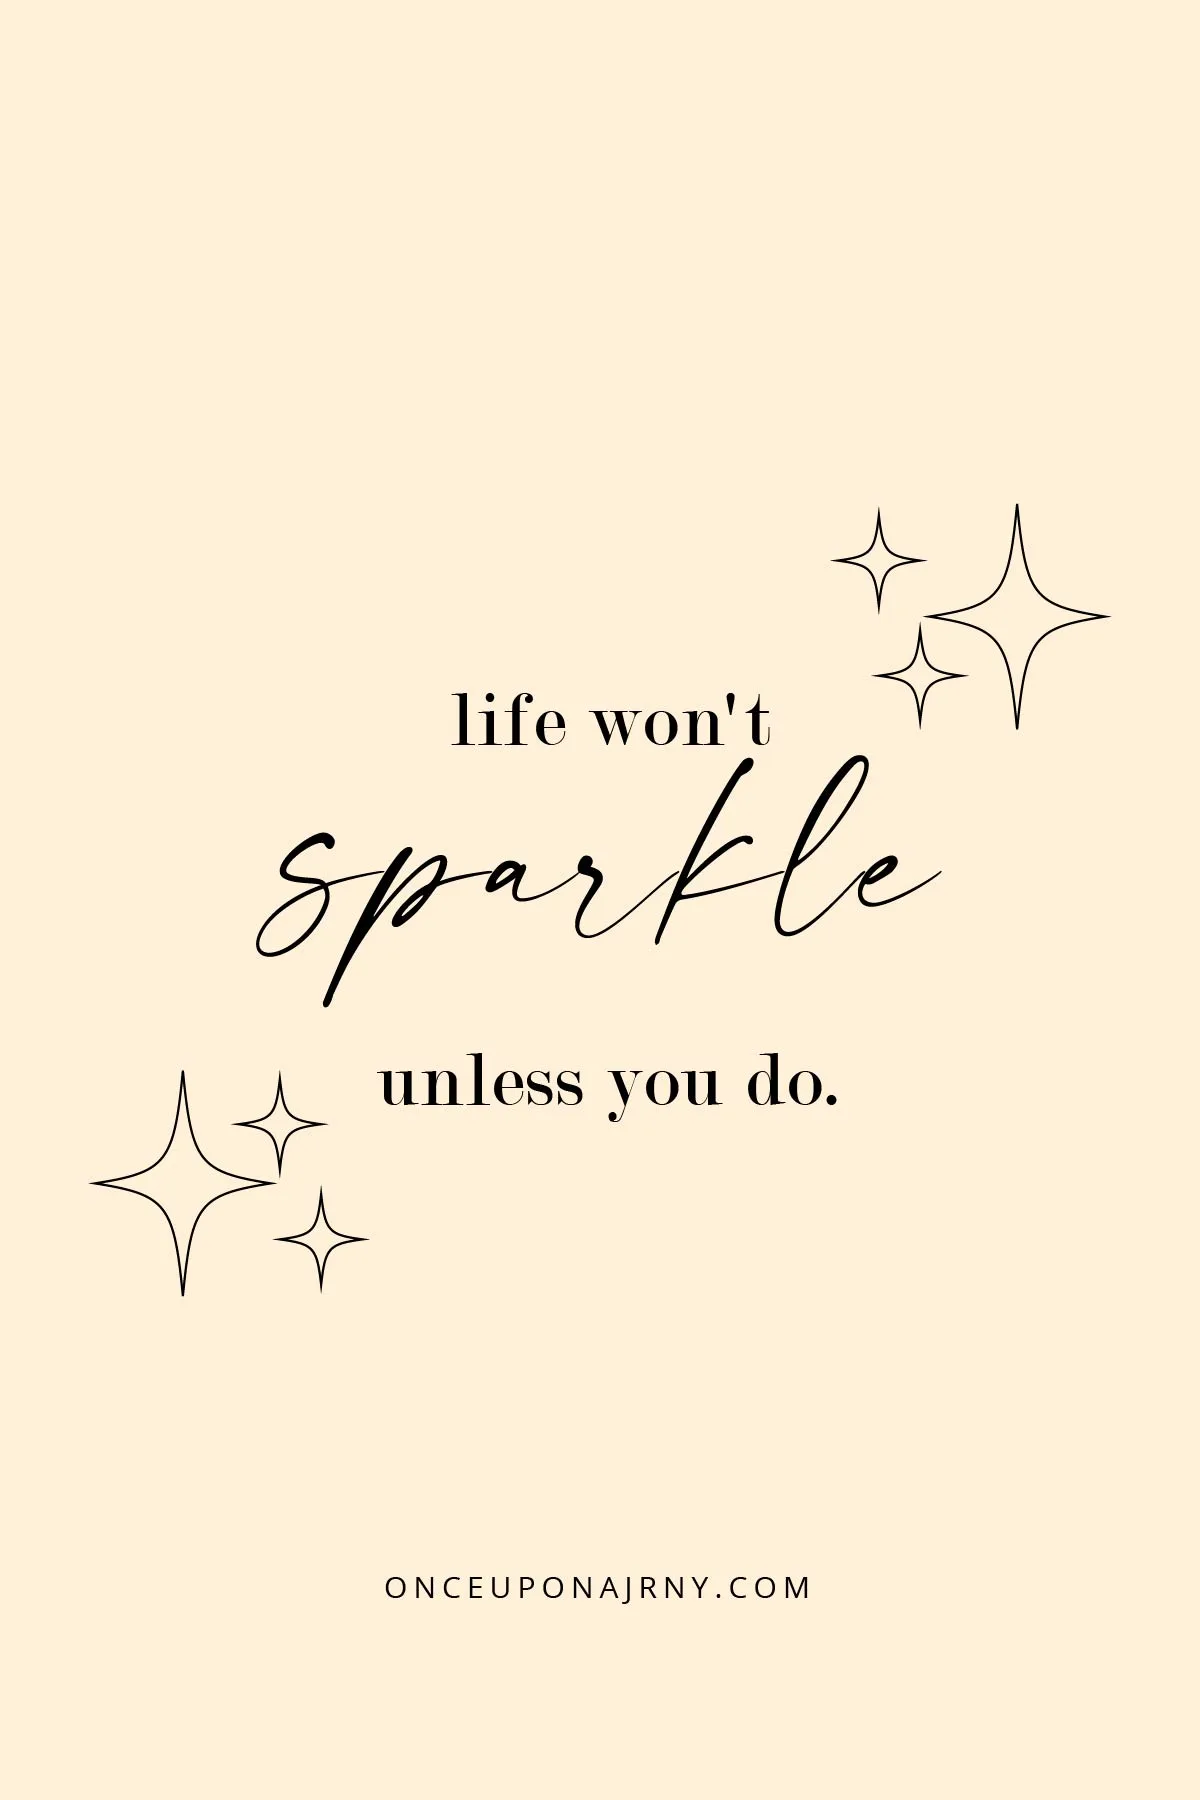 Life won't sparkle unless you do lgbt quotes